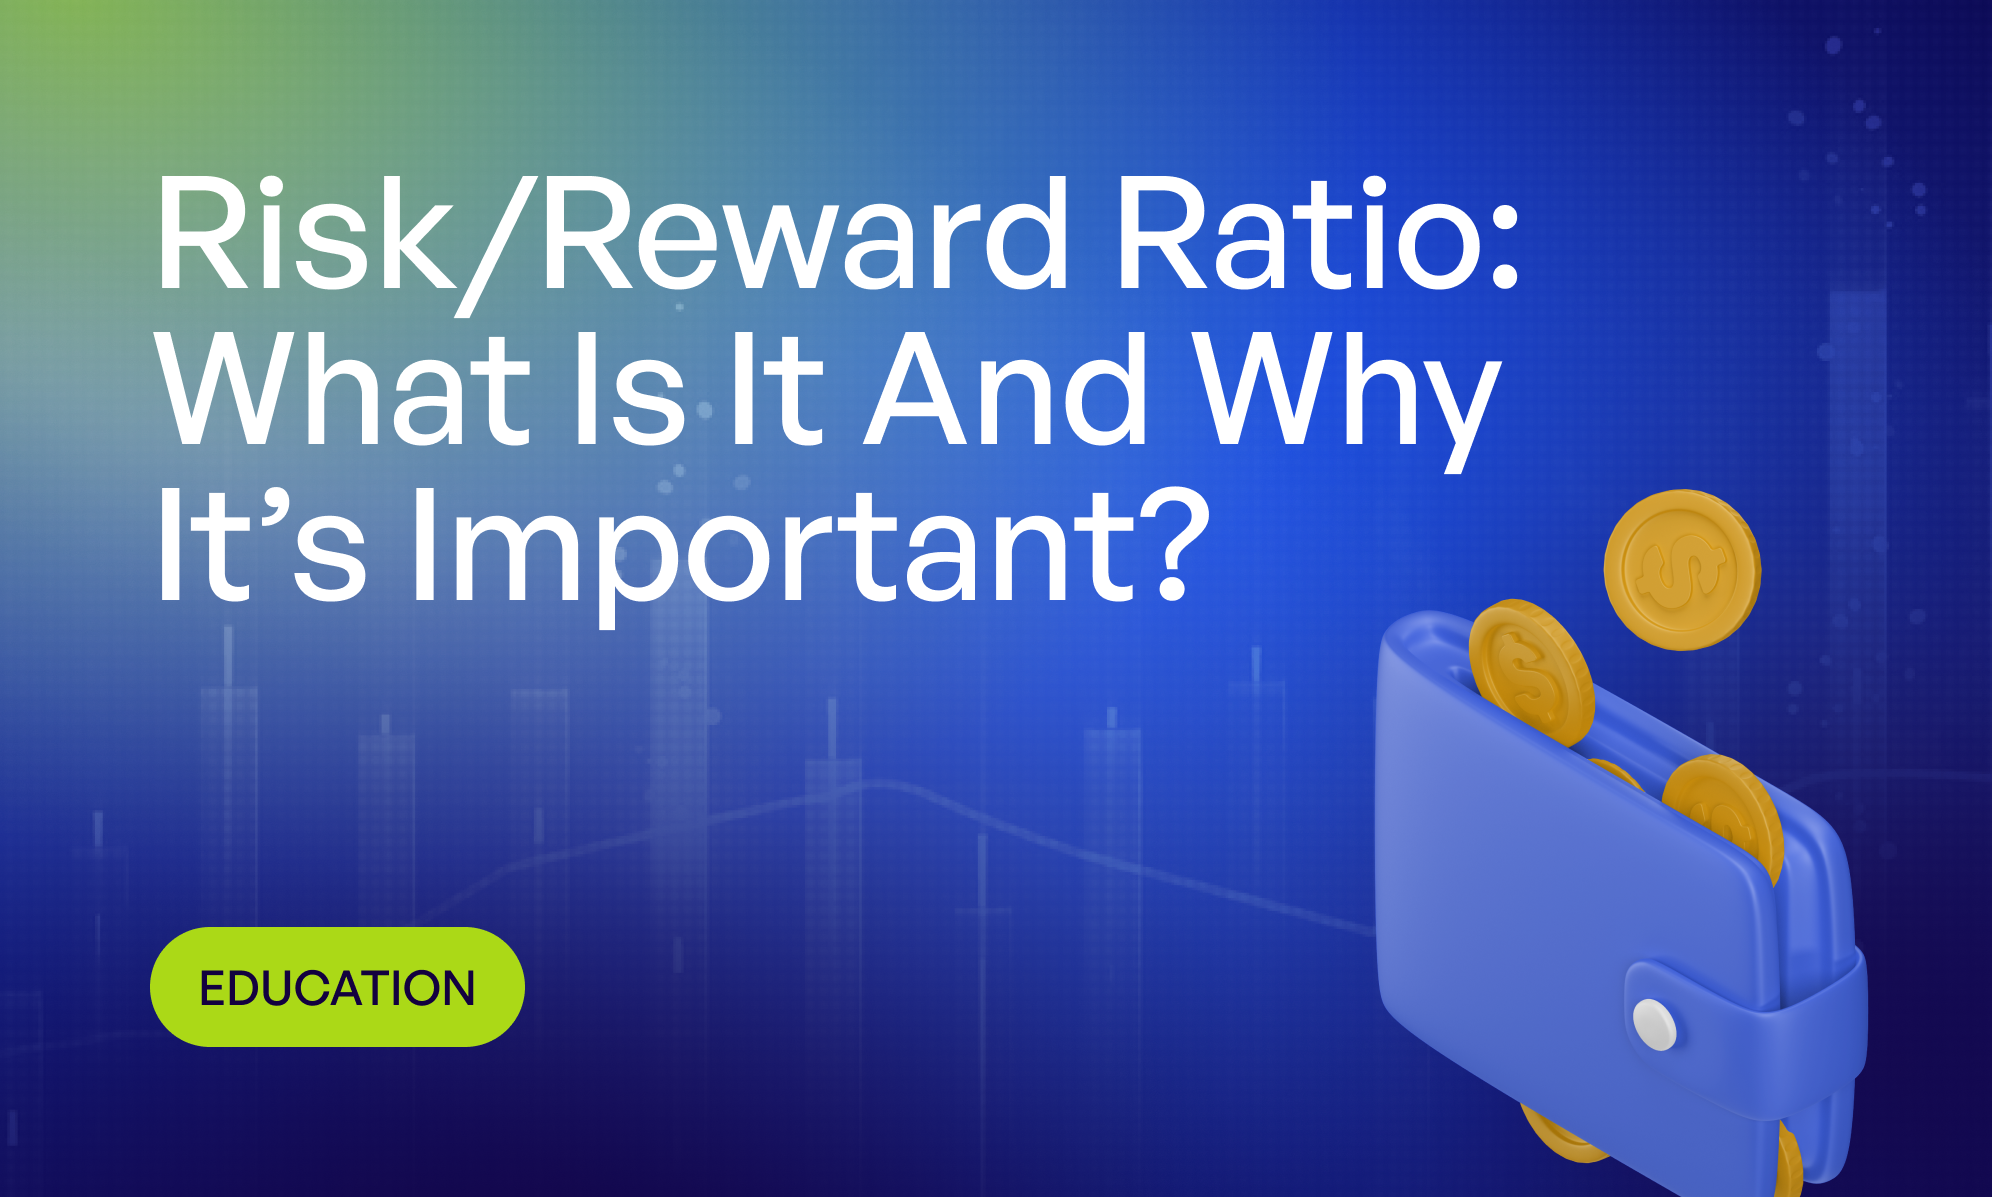 Risk/Reward Ratio: What Is It And Why It’s Important?